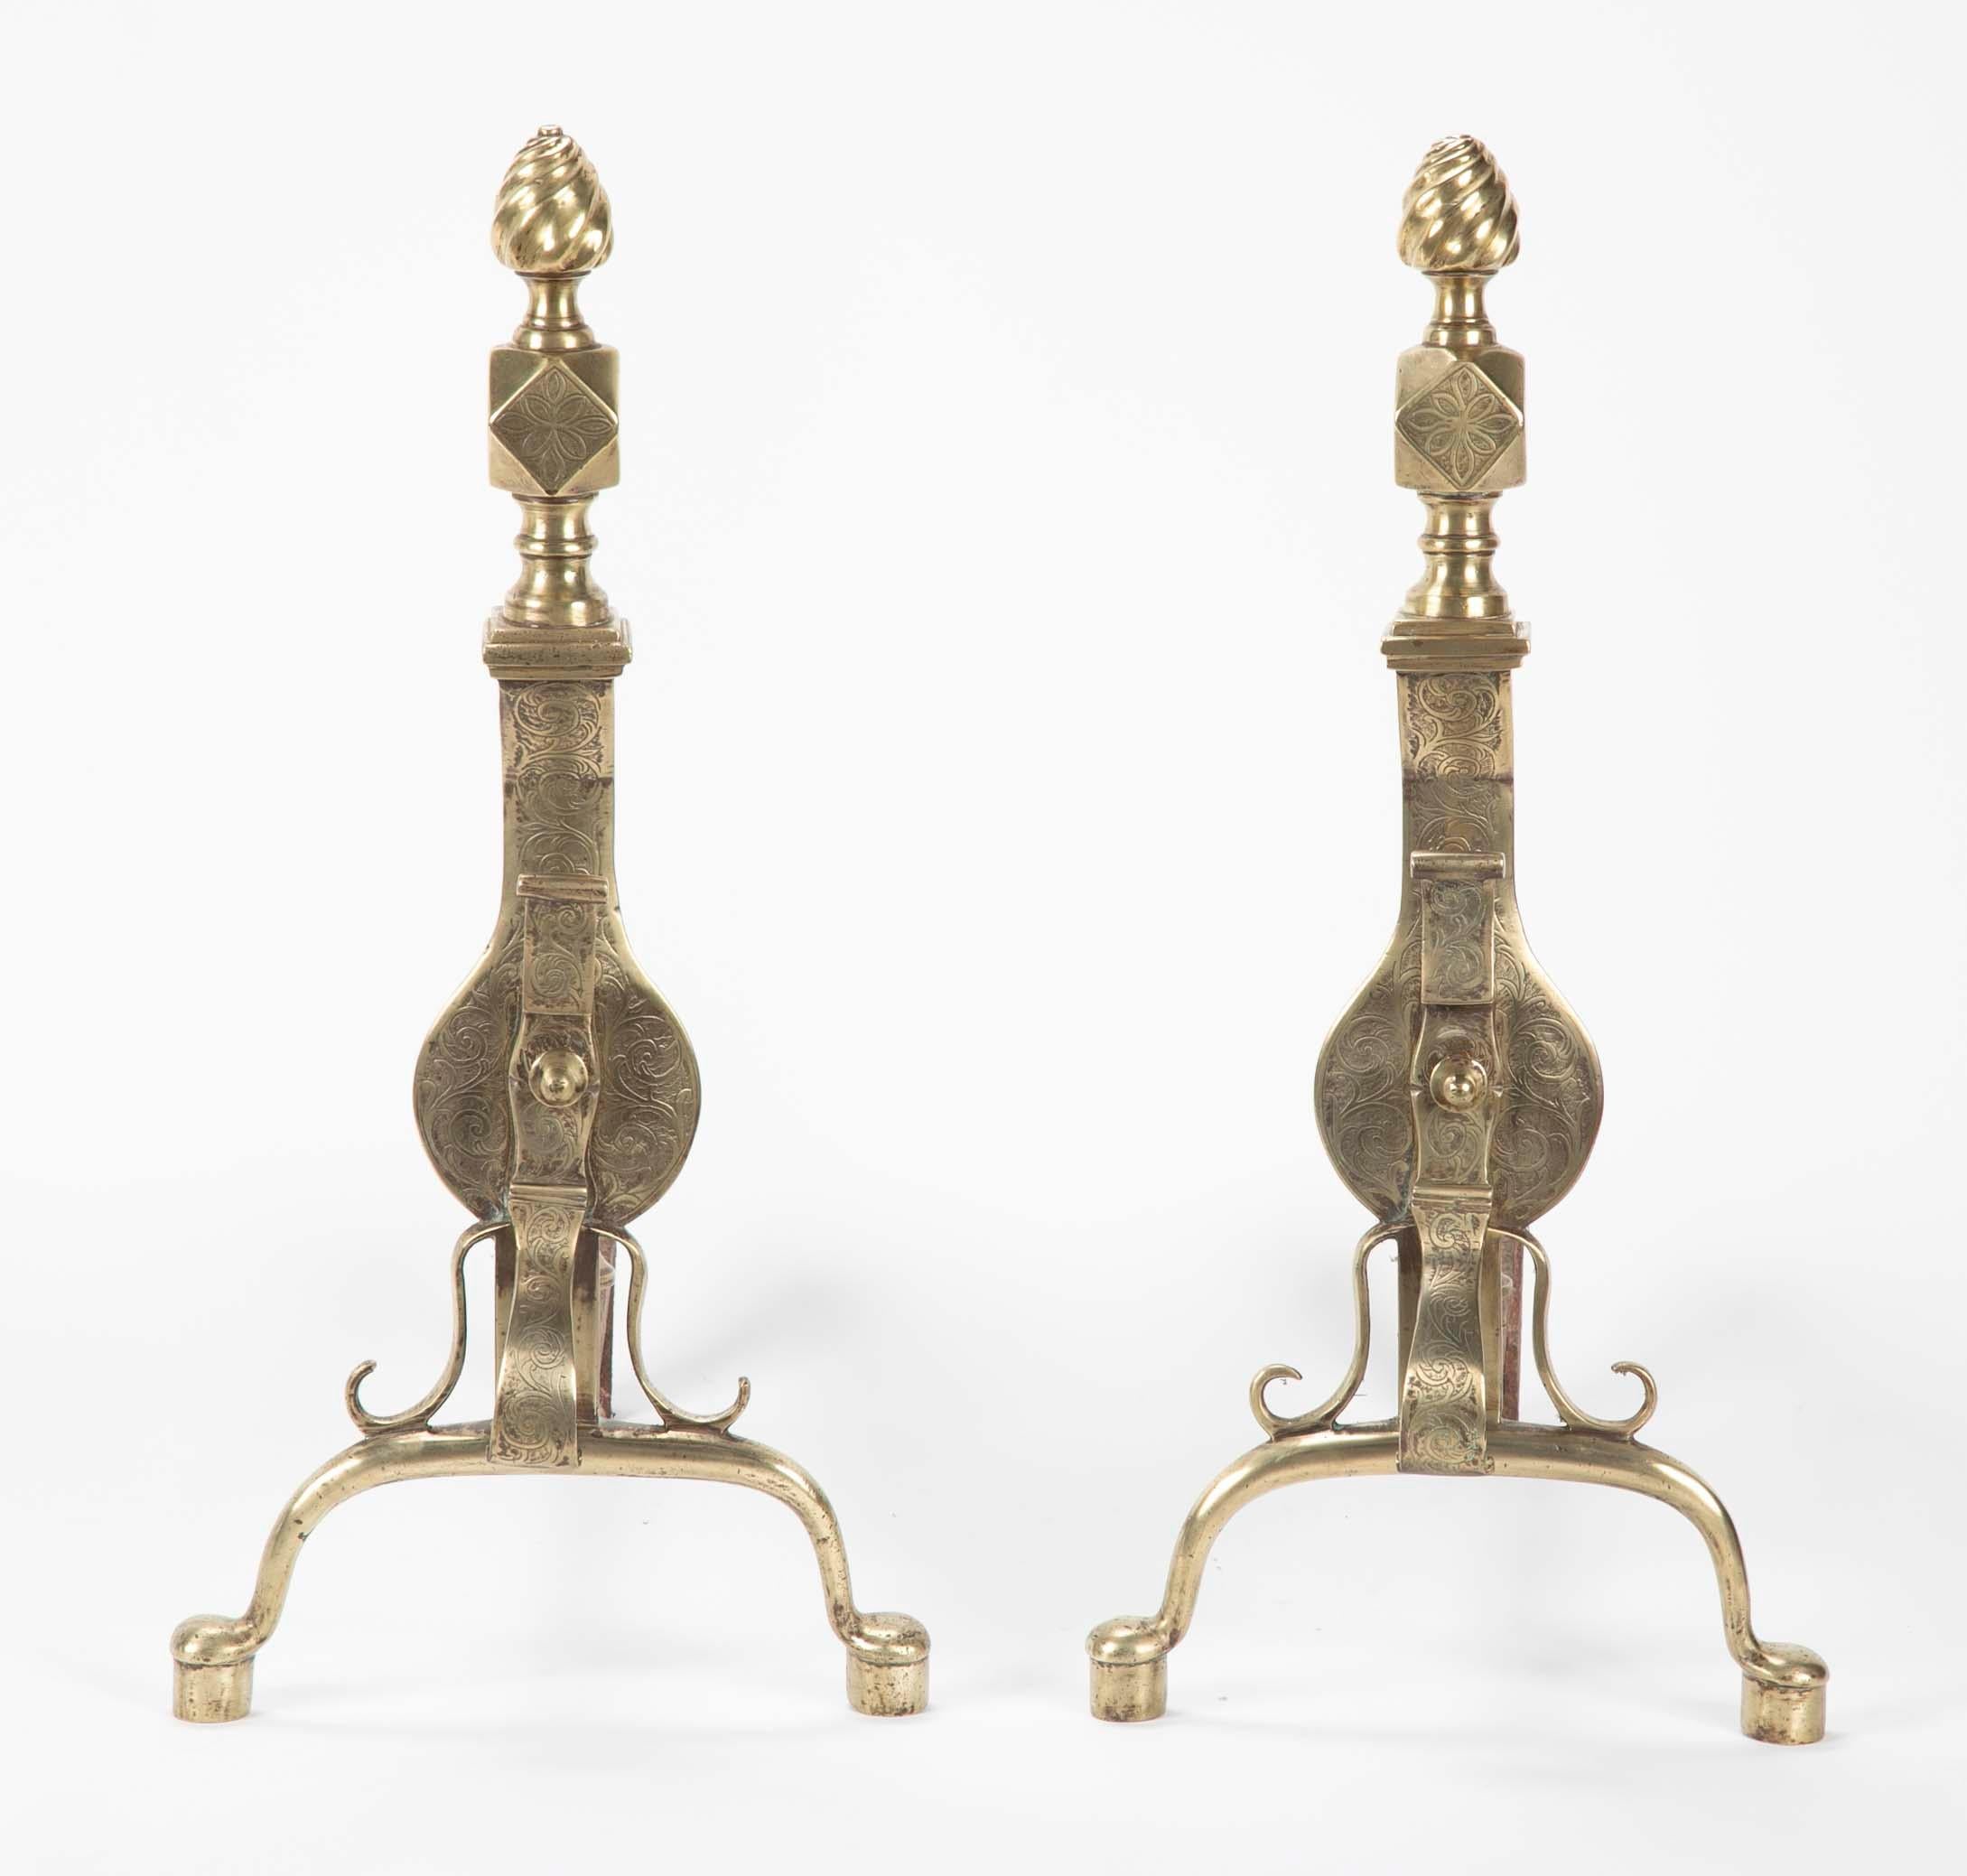 A fine pair of brass andirons with scrolling etched designs. The flame finials over diamond squares above a vase form body held up by cabriole legs. Quite the elegant pair.  
English, early 19th century, Regency period.